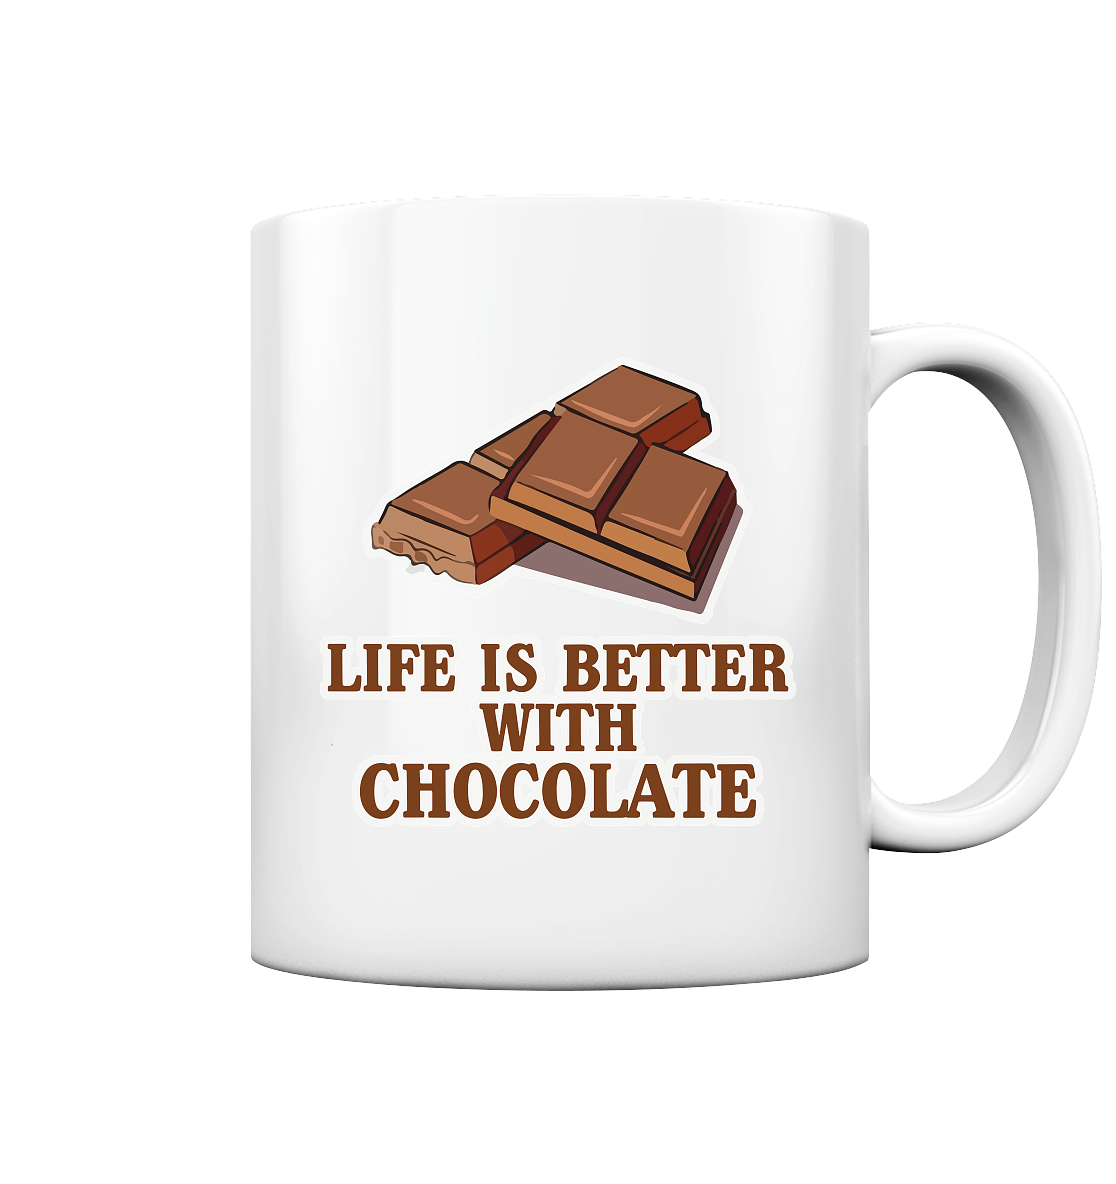 Life is better with chocolate - Tasse glossy